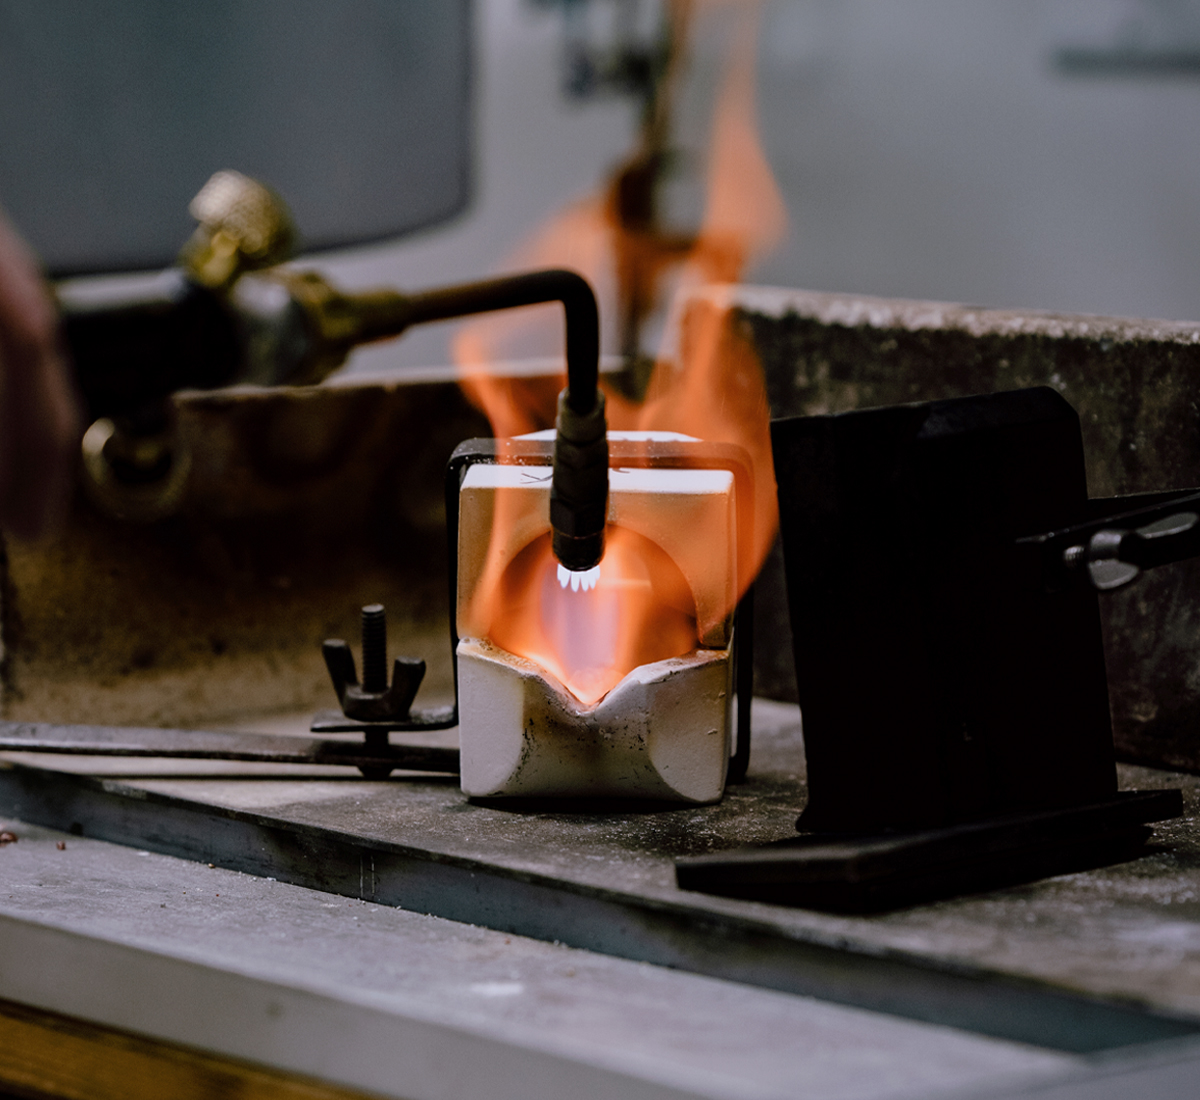 Flames appear from a crucible used to melt gold ready to be shaped into a custom piece of jewellery